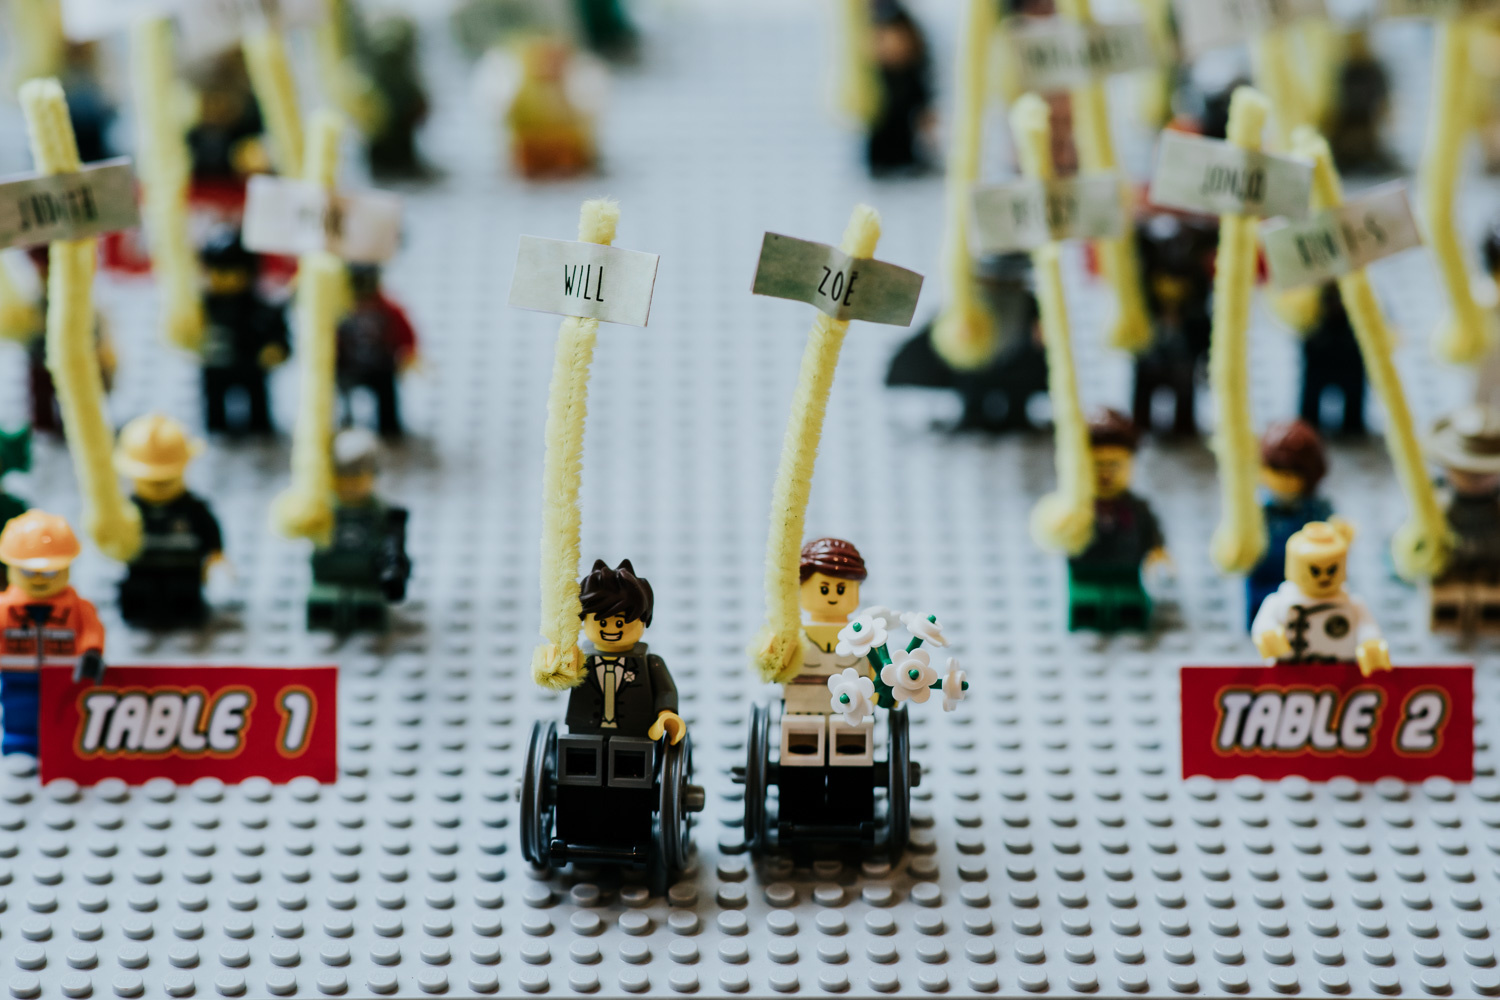 lego table plan with bride and groom in wheelchairs